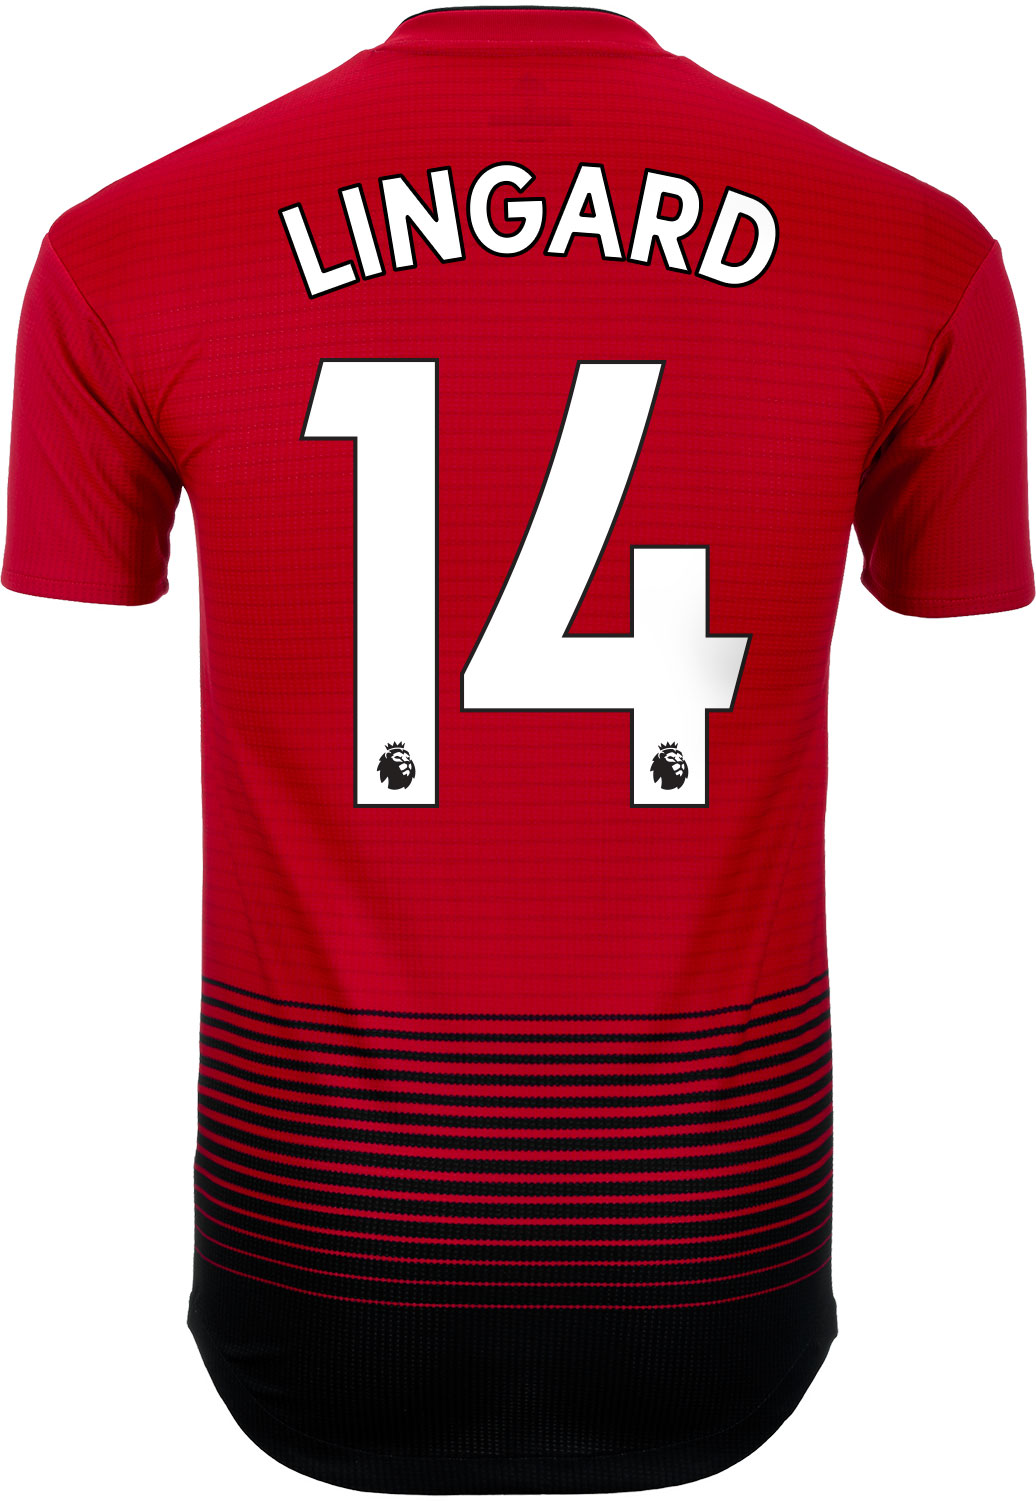 lingard manchester united jersey